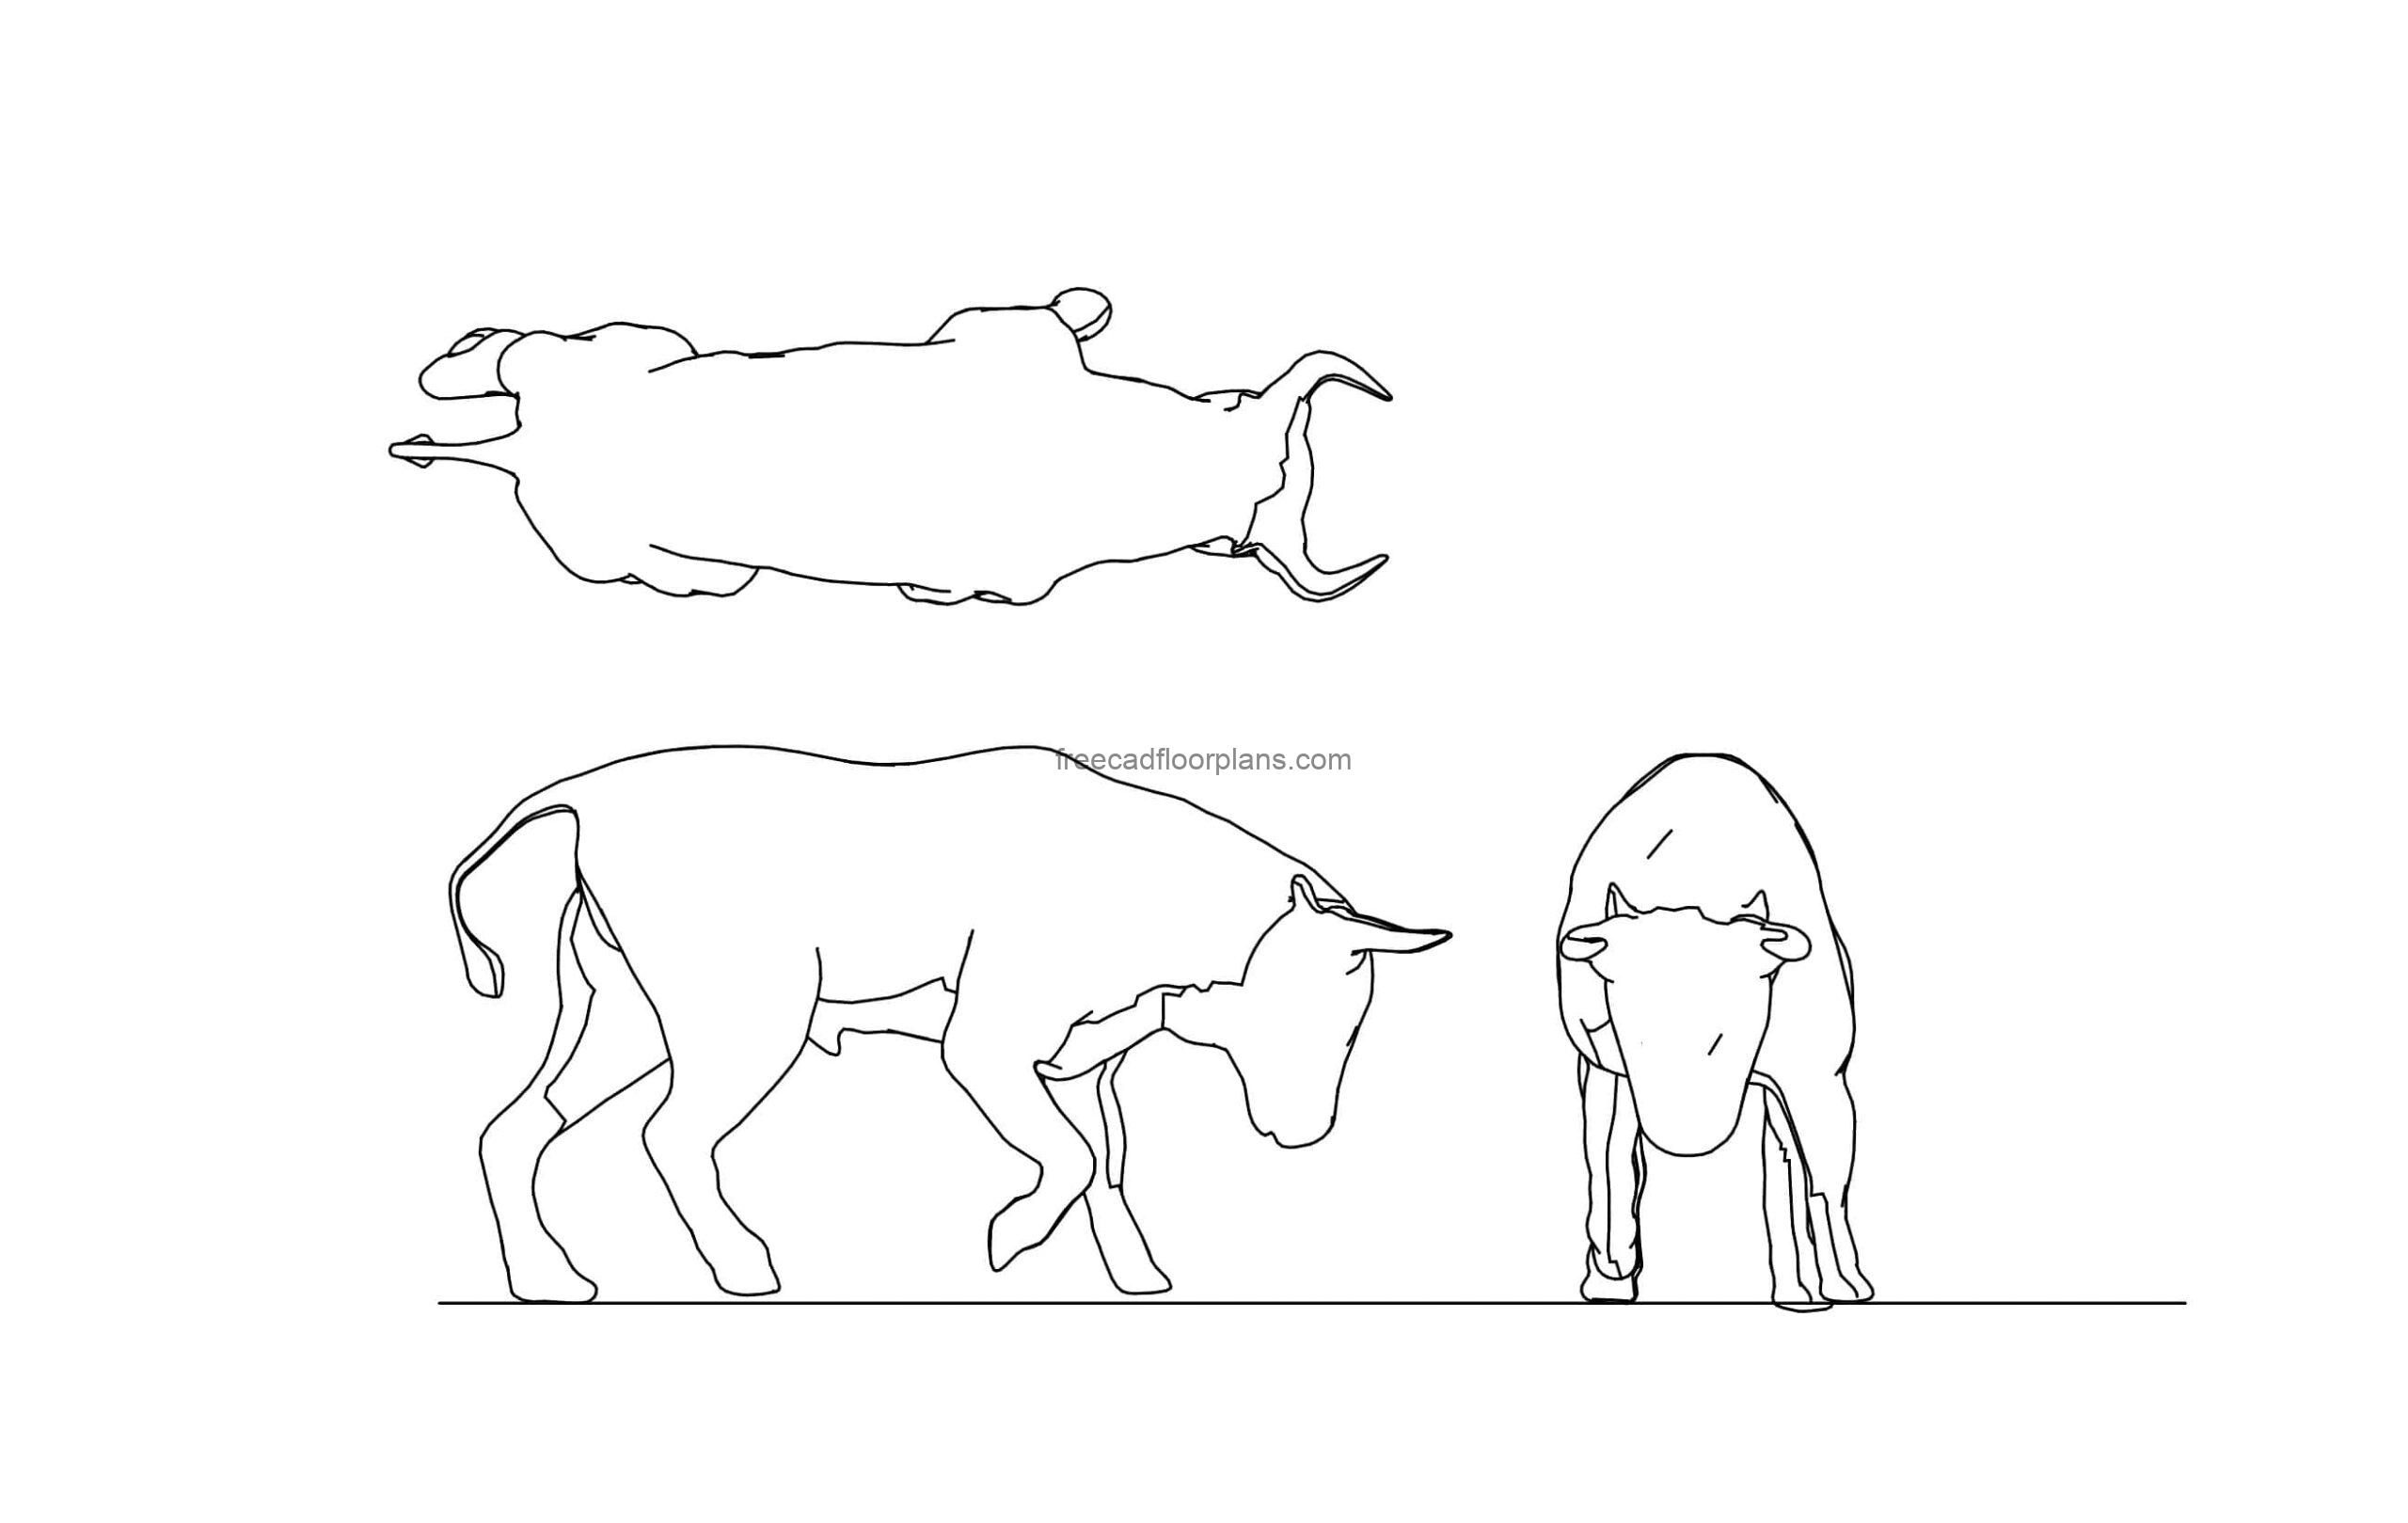 bull drawing, farm animal cad block with all 2d views plan and side elevations for free download, dwg cad file